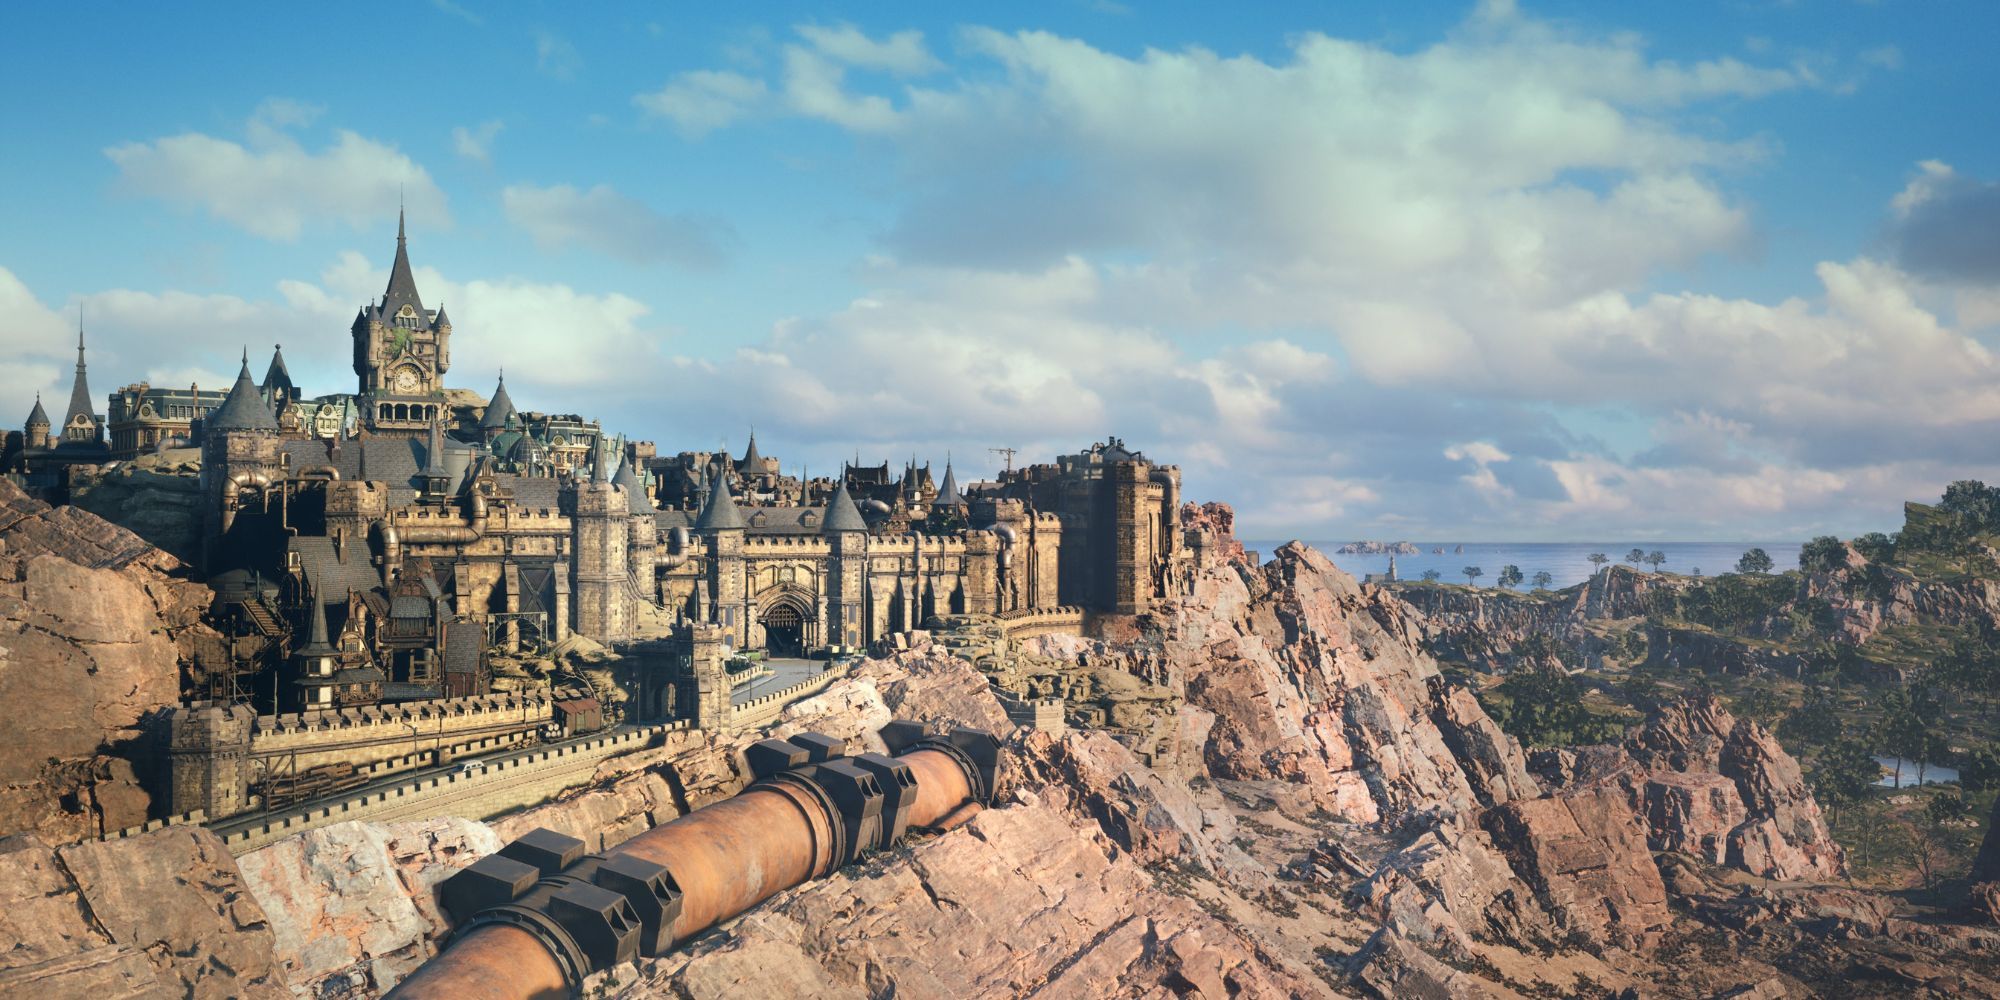 Still from Final Fantasy 7 Rebirth of the Kalm village situated on top of a rock with Eastern European architecture. 